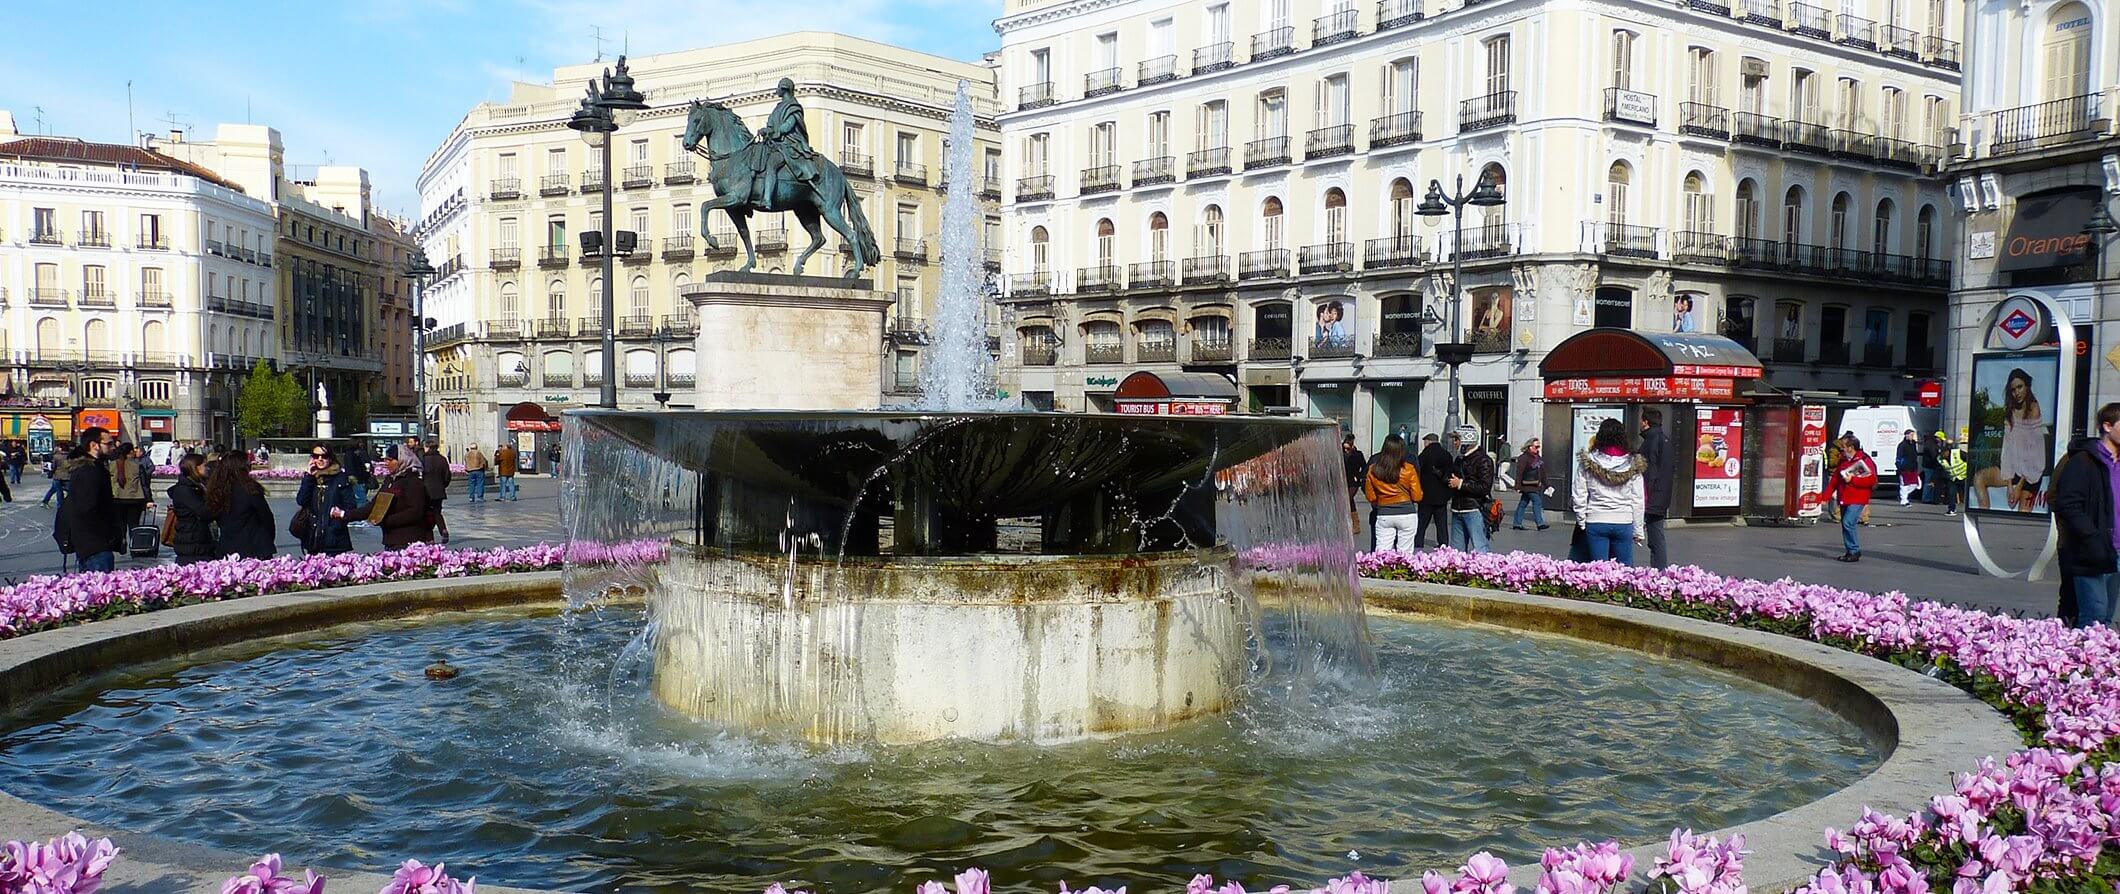 Fountain in central Madrid surrounded by flowers